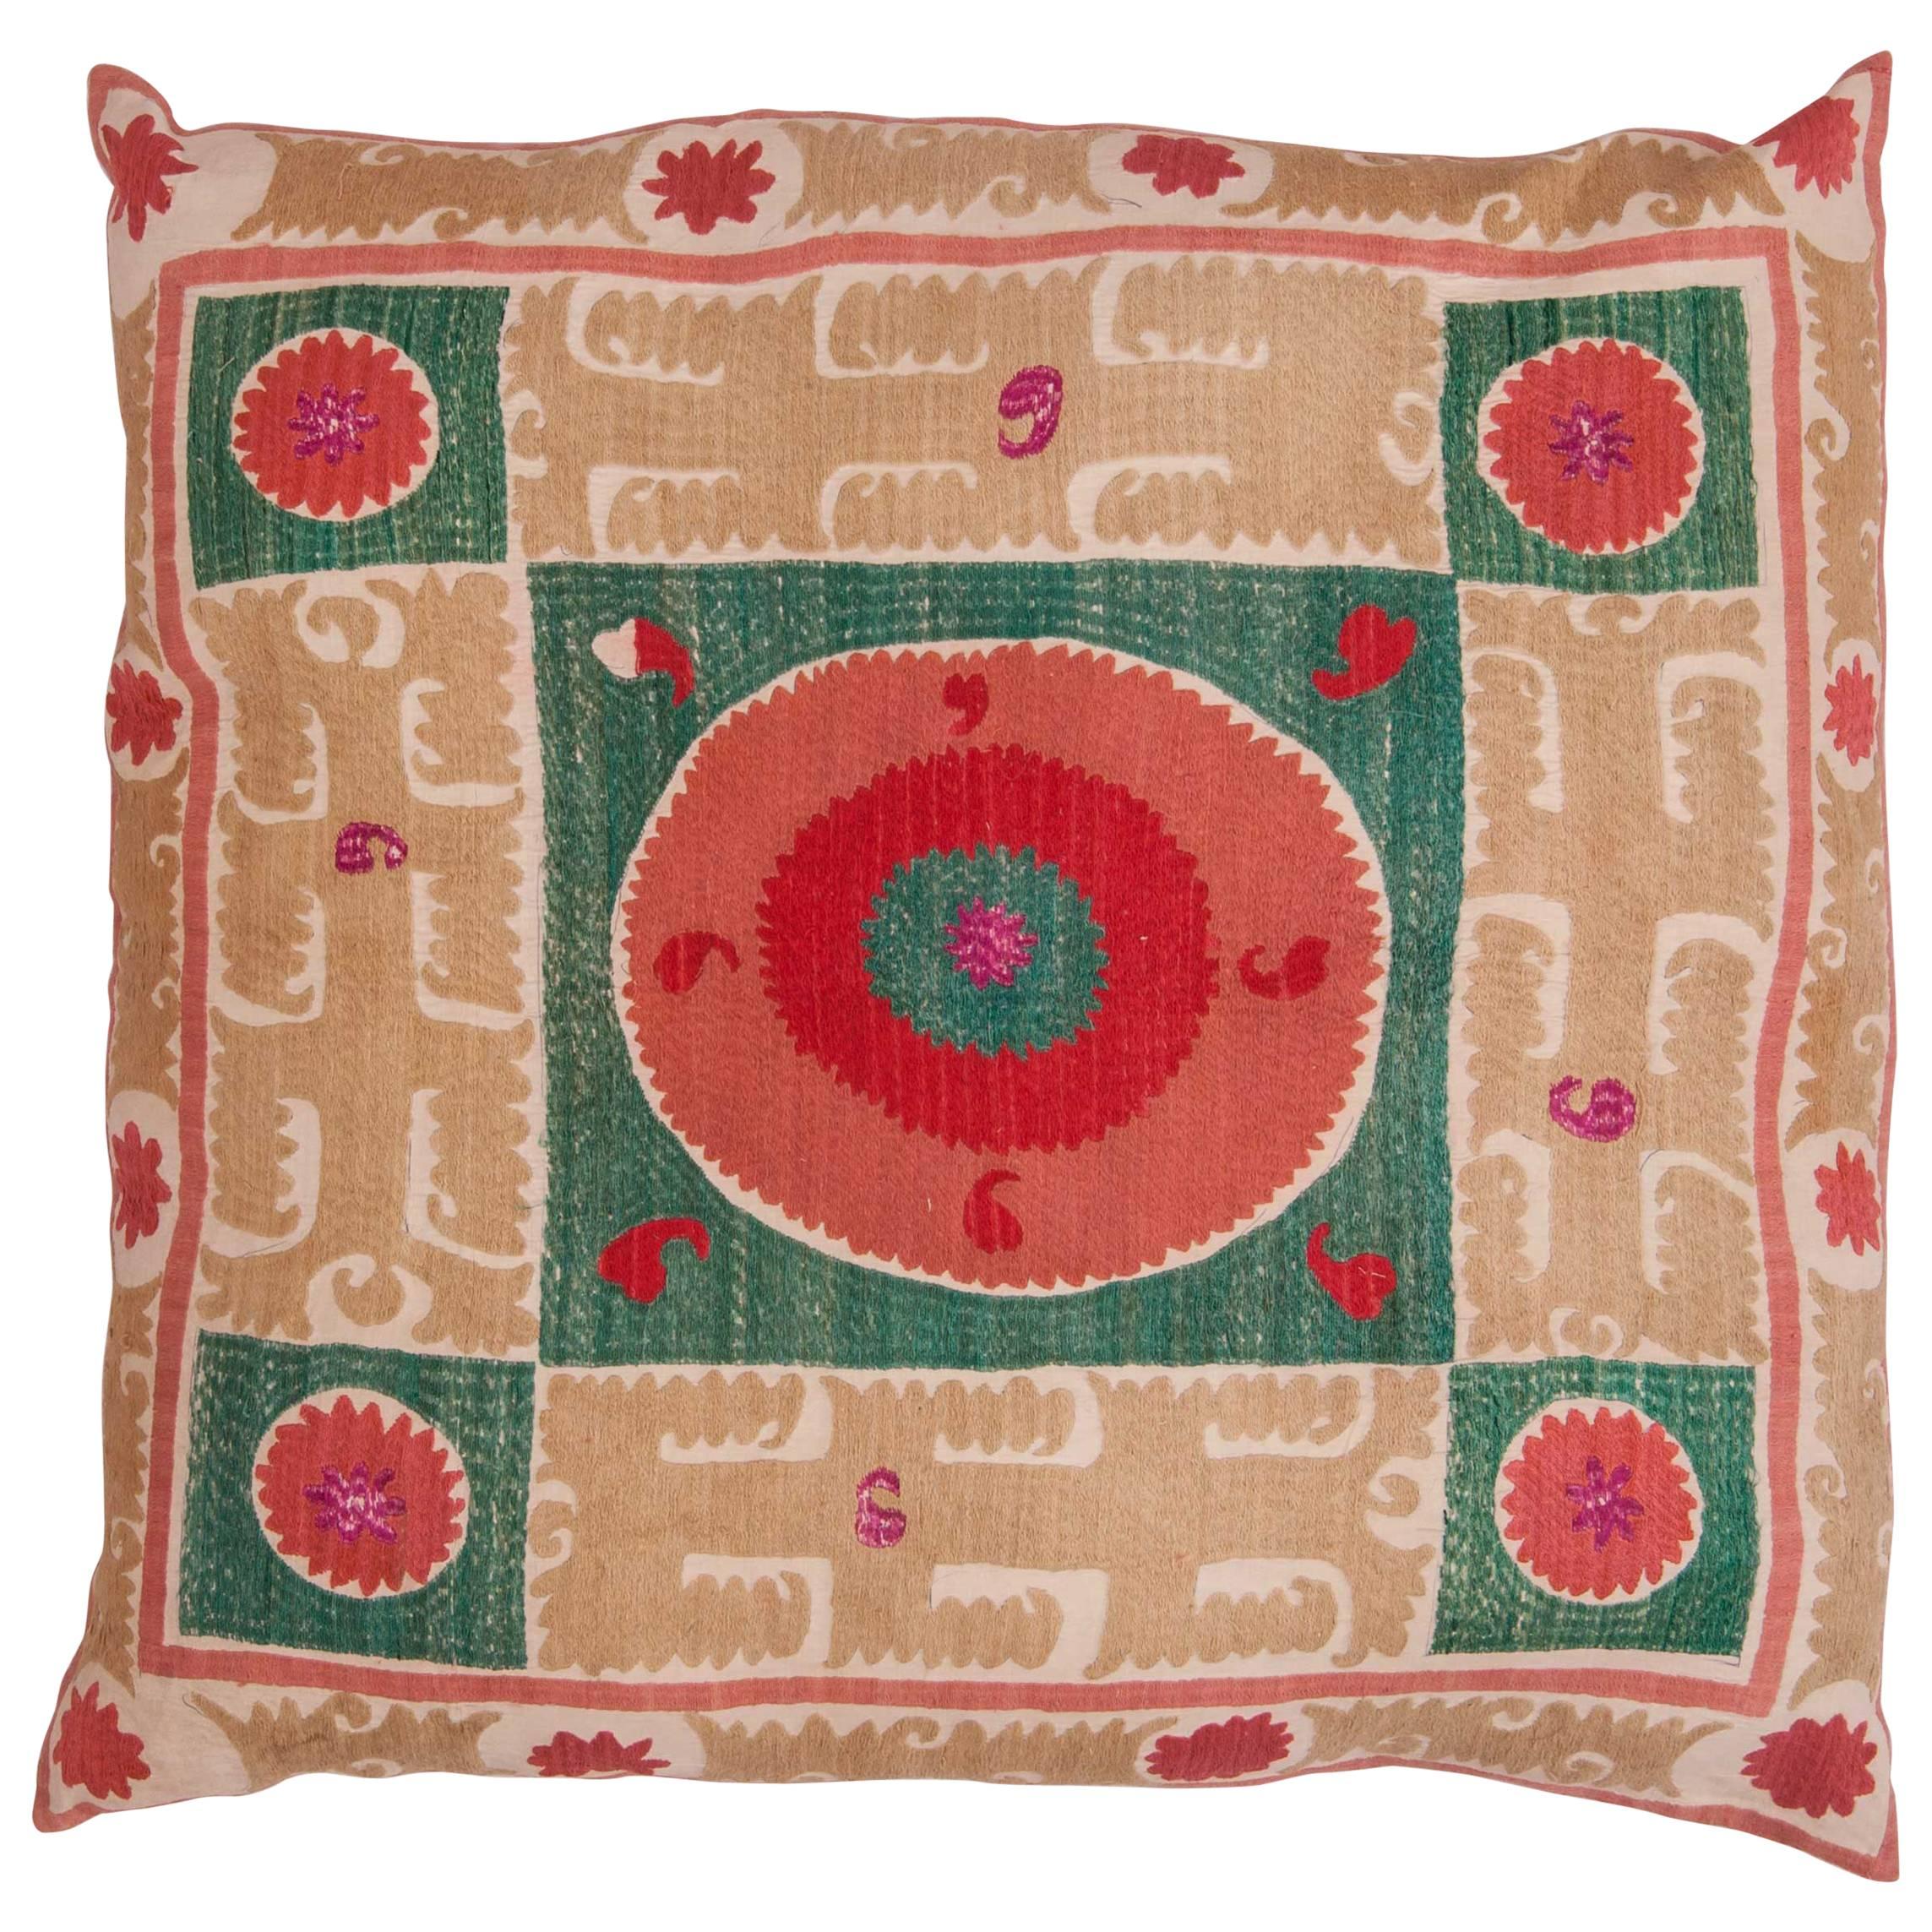 Giant Floor Pillow Made from a Mid-20th Century Samarkand Suzani